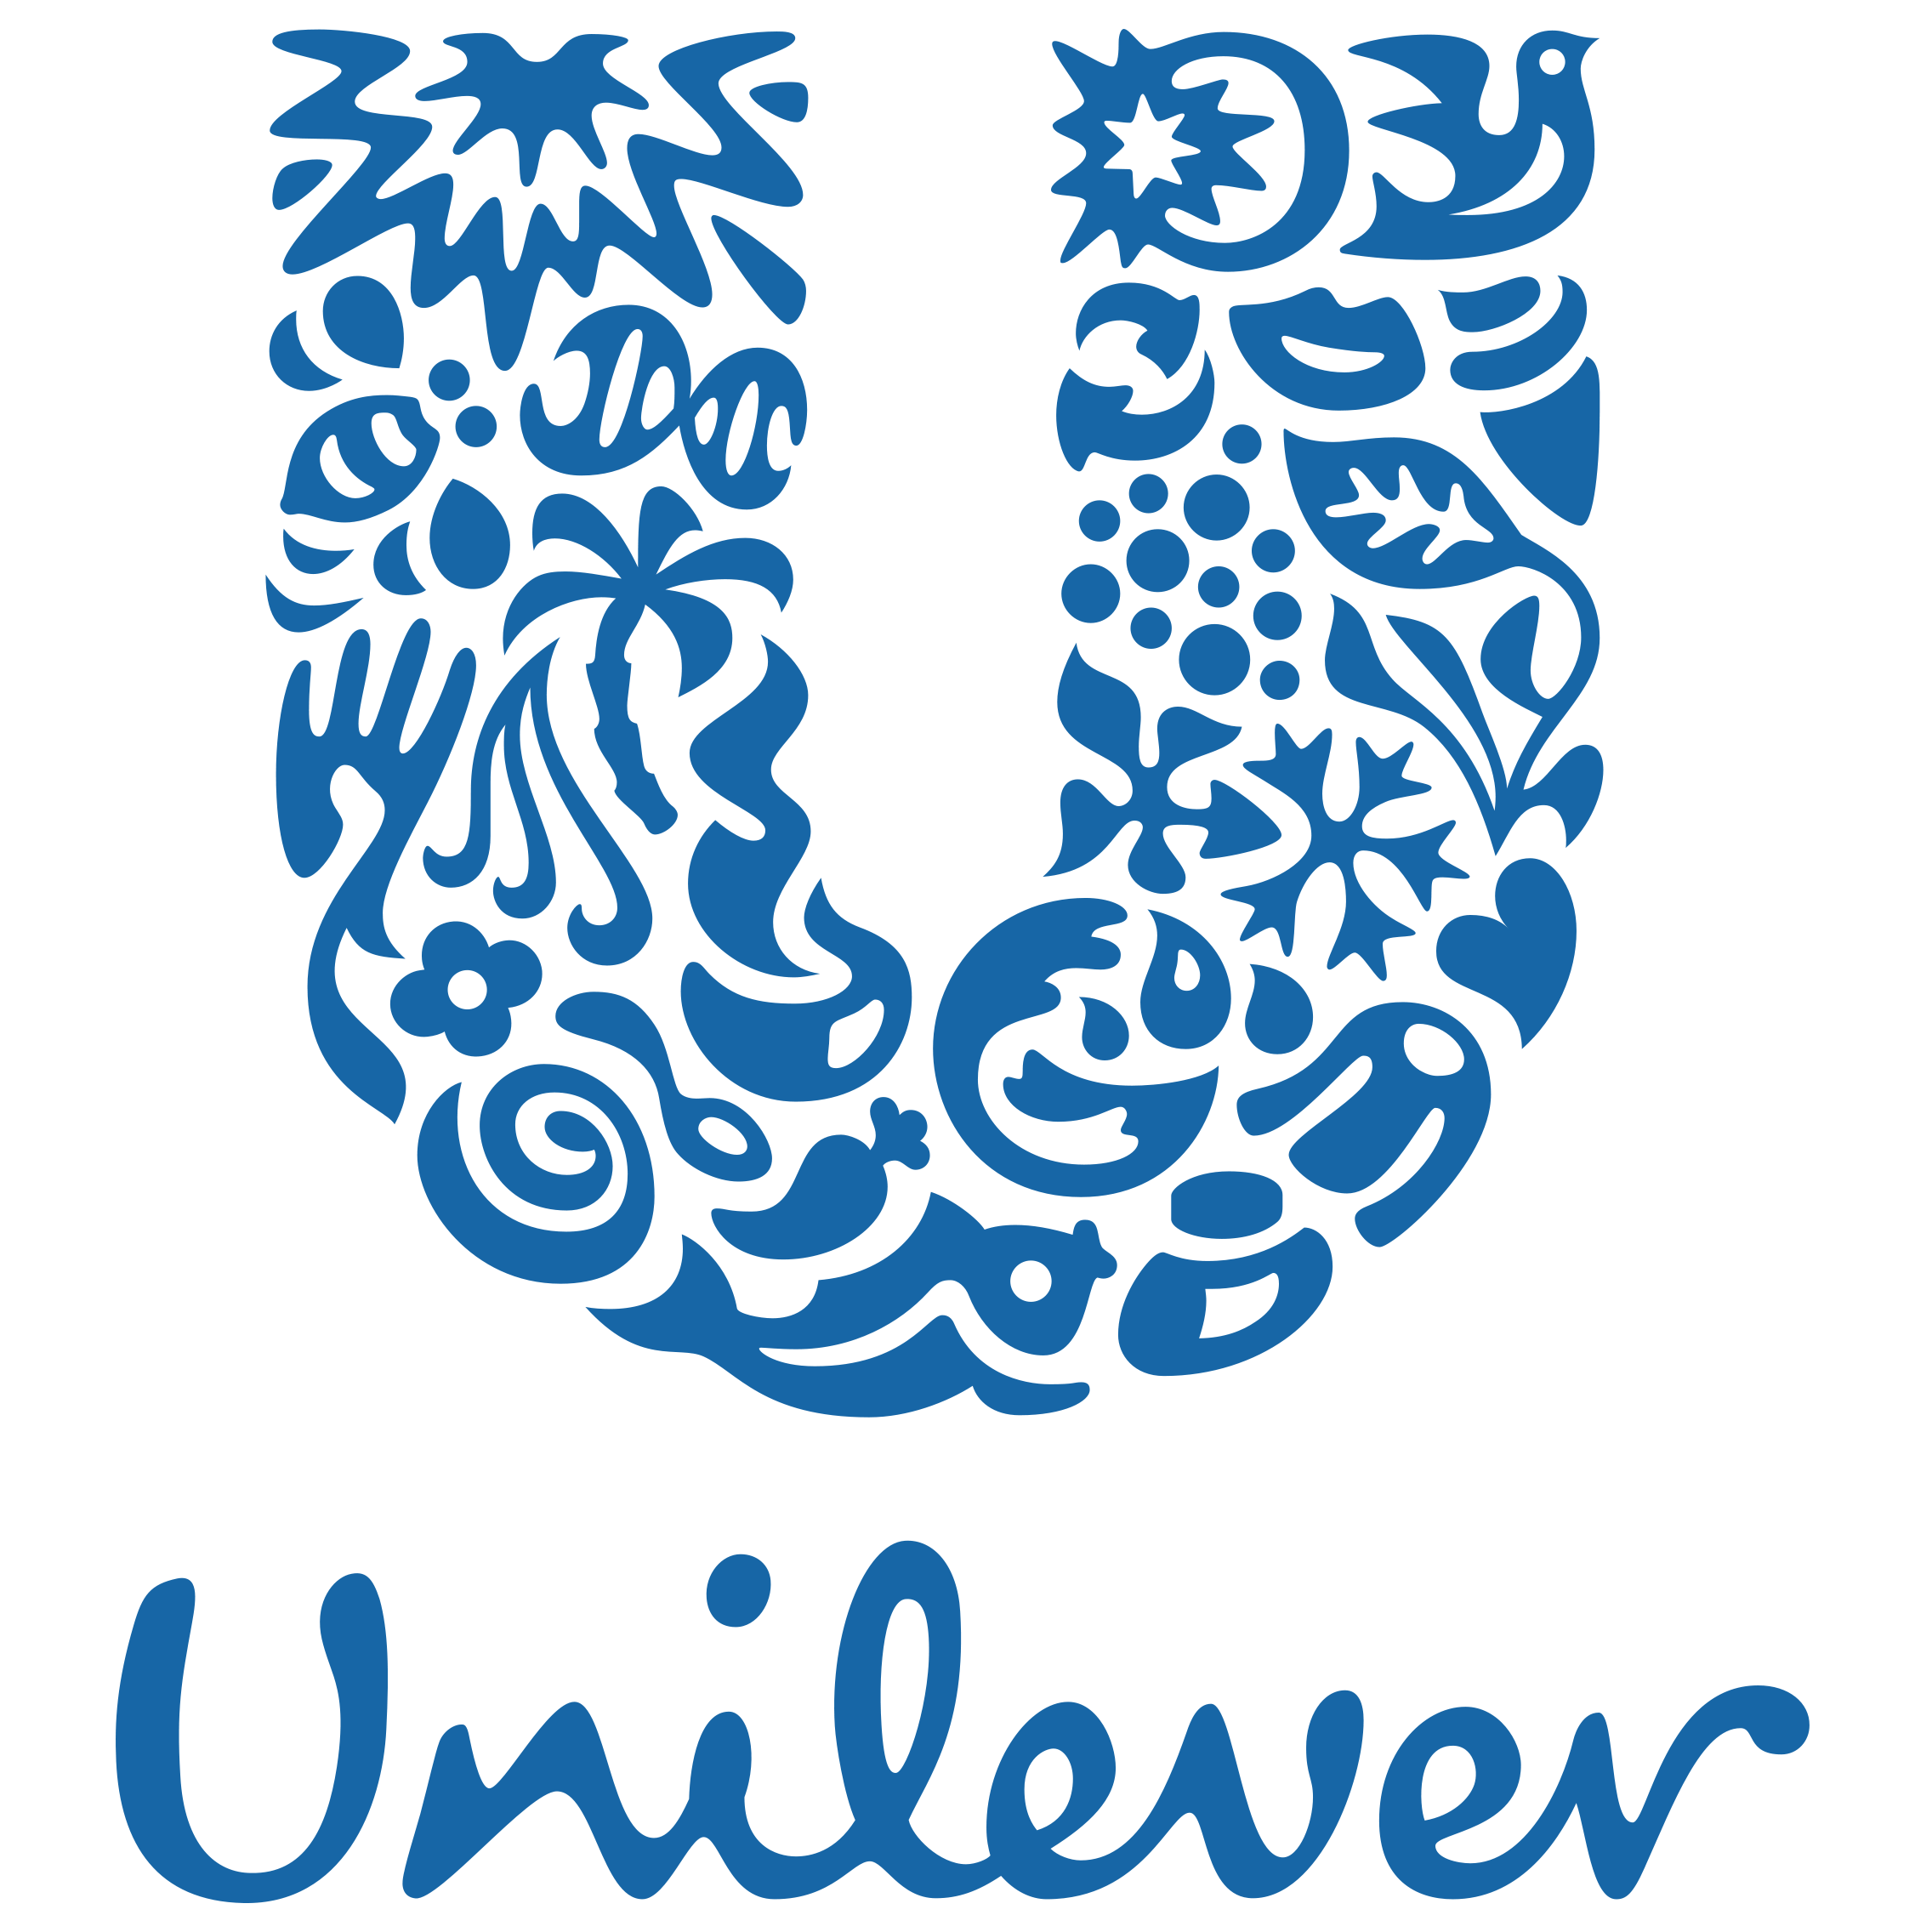 Unilever-logo-and-name.png